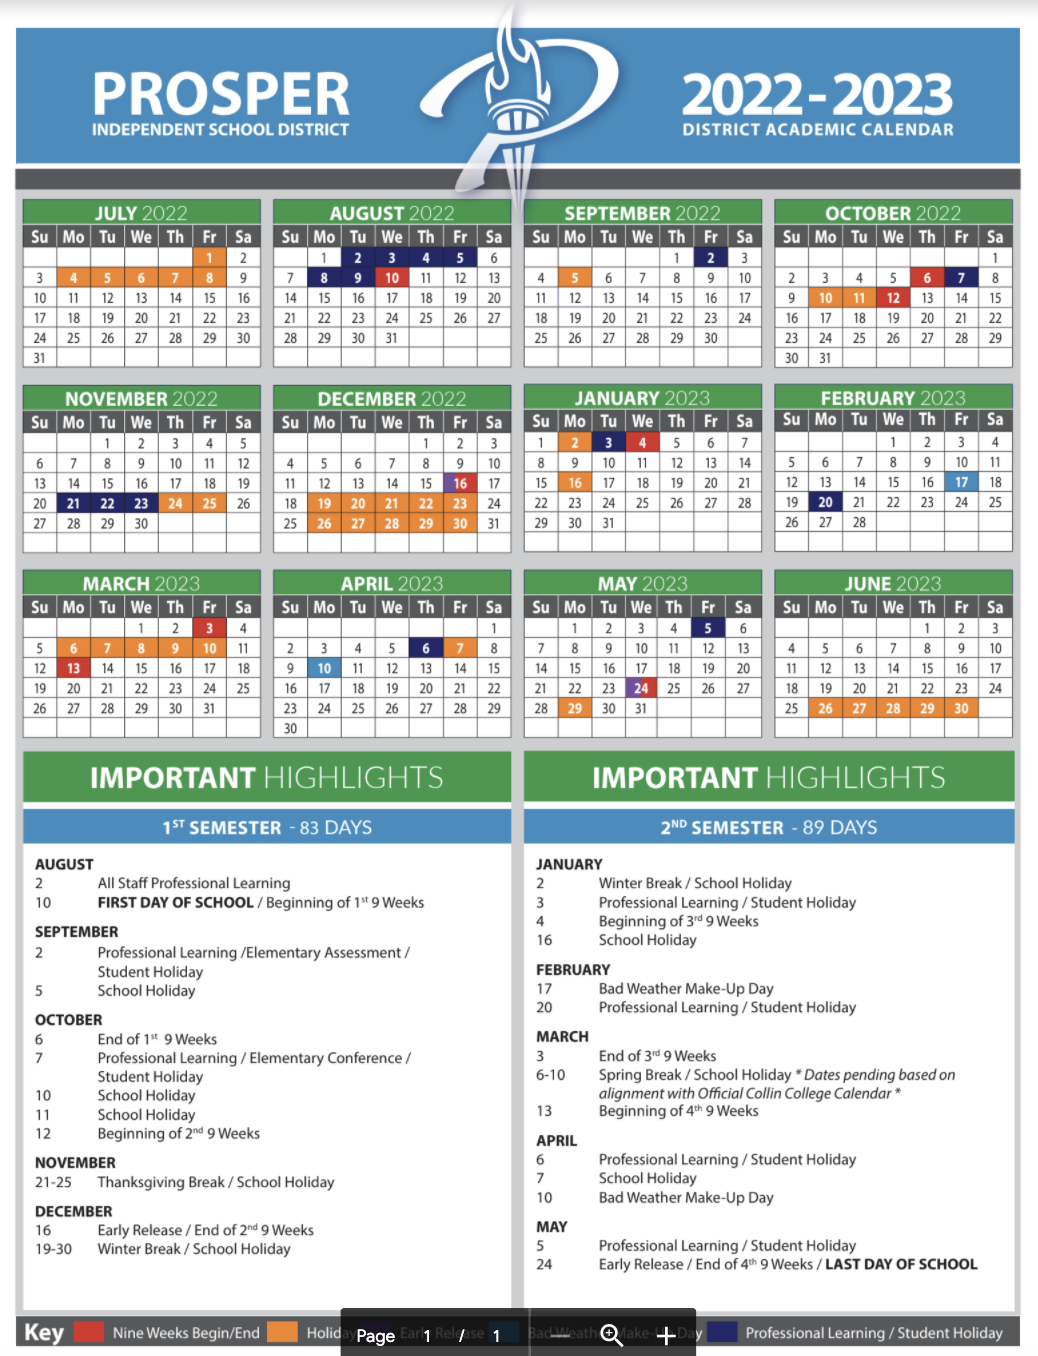 Pisd Calendar 2022 Here Are Prosper Isd's School Calendars For The 2022-2023 And The 2023-2024  School Years | Cities | Checkoutdfw.com